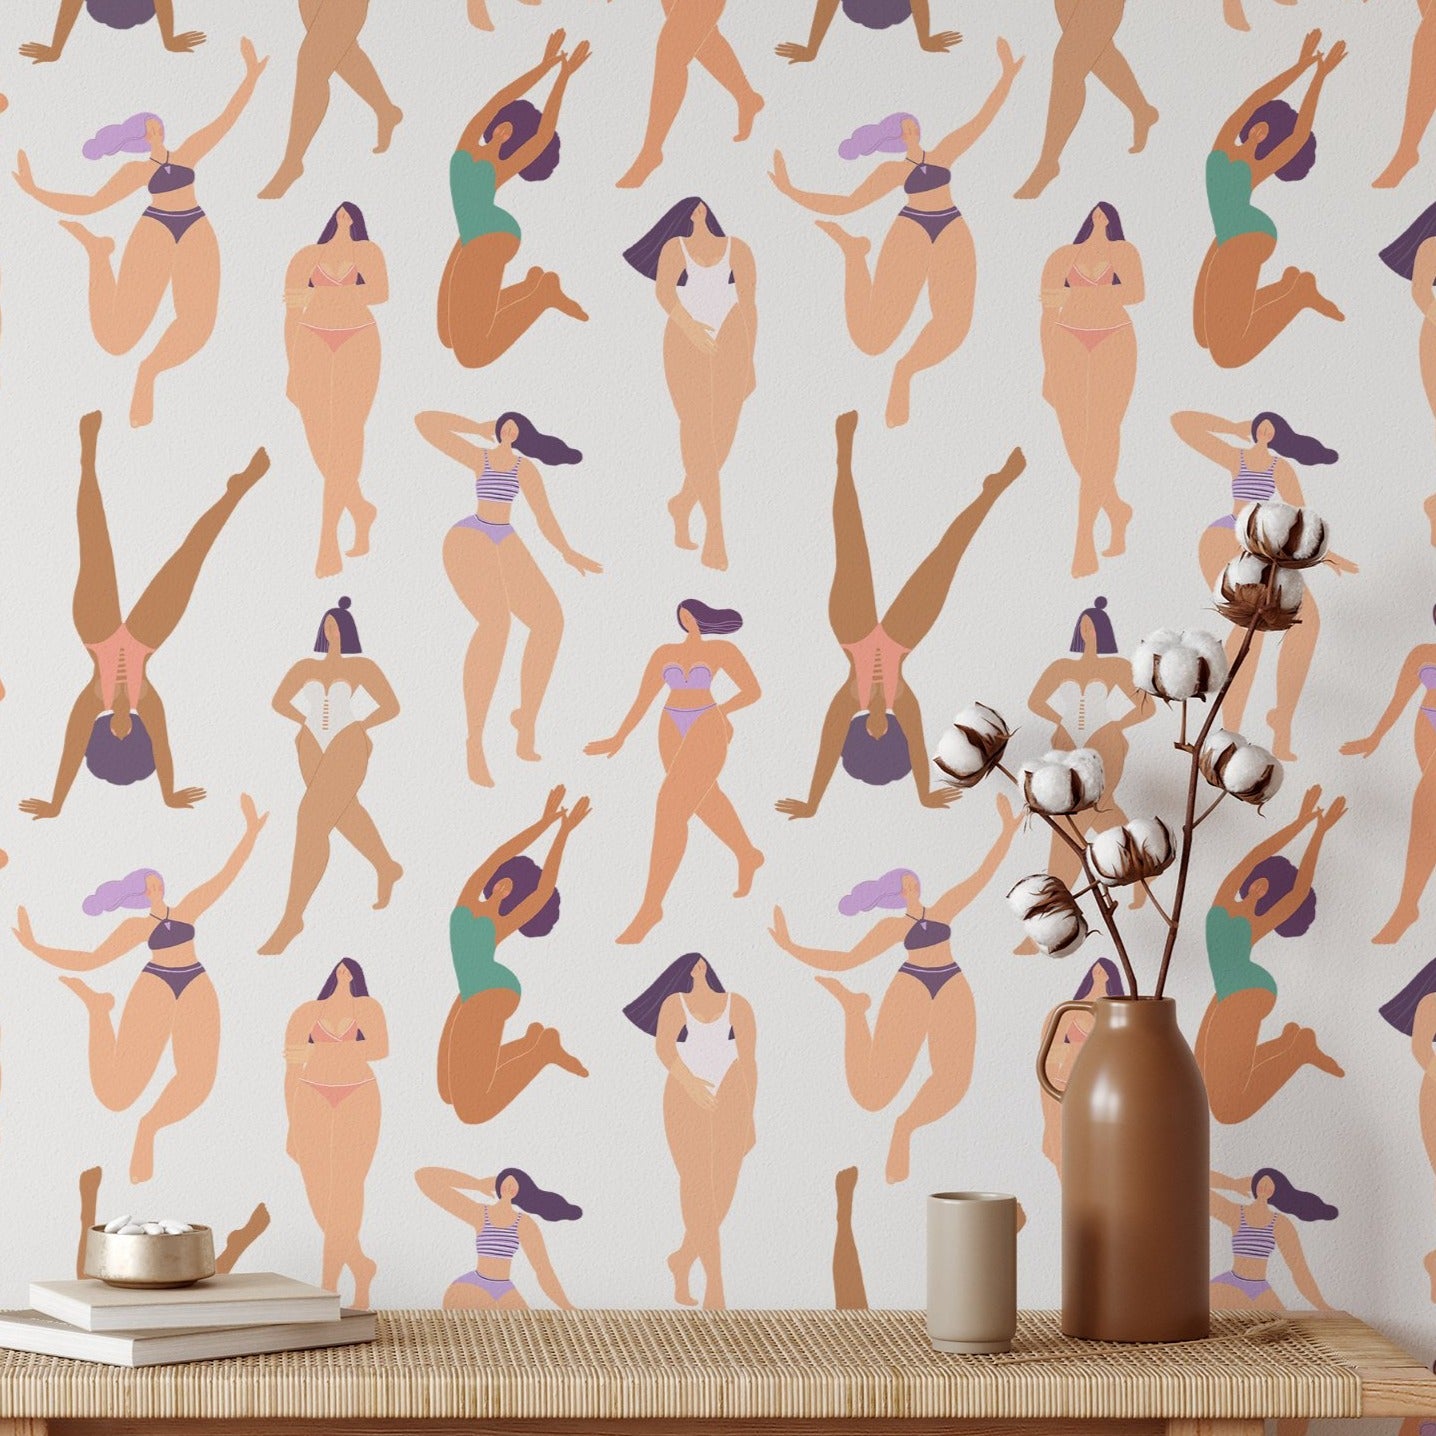 Modern room decorated with Girls in Paradise Wallpaper II featuring joyful dance and yoga motifs